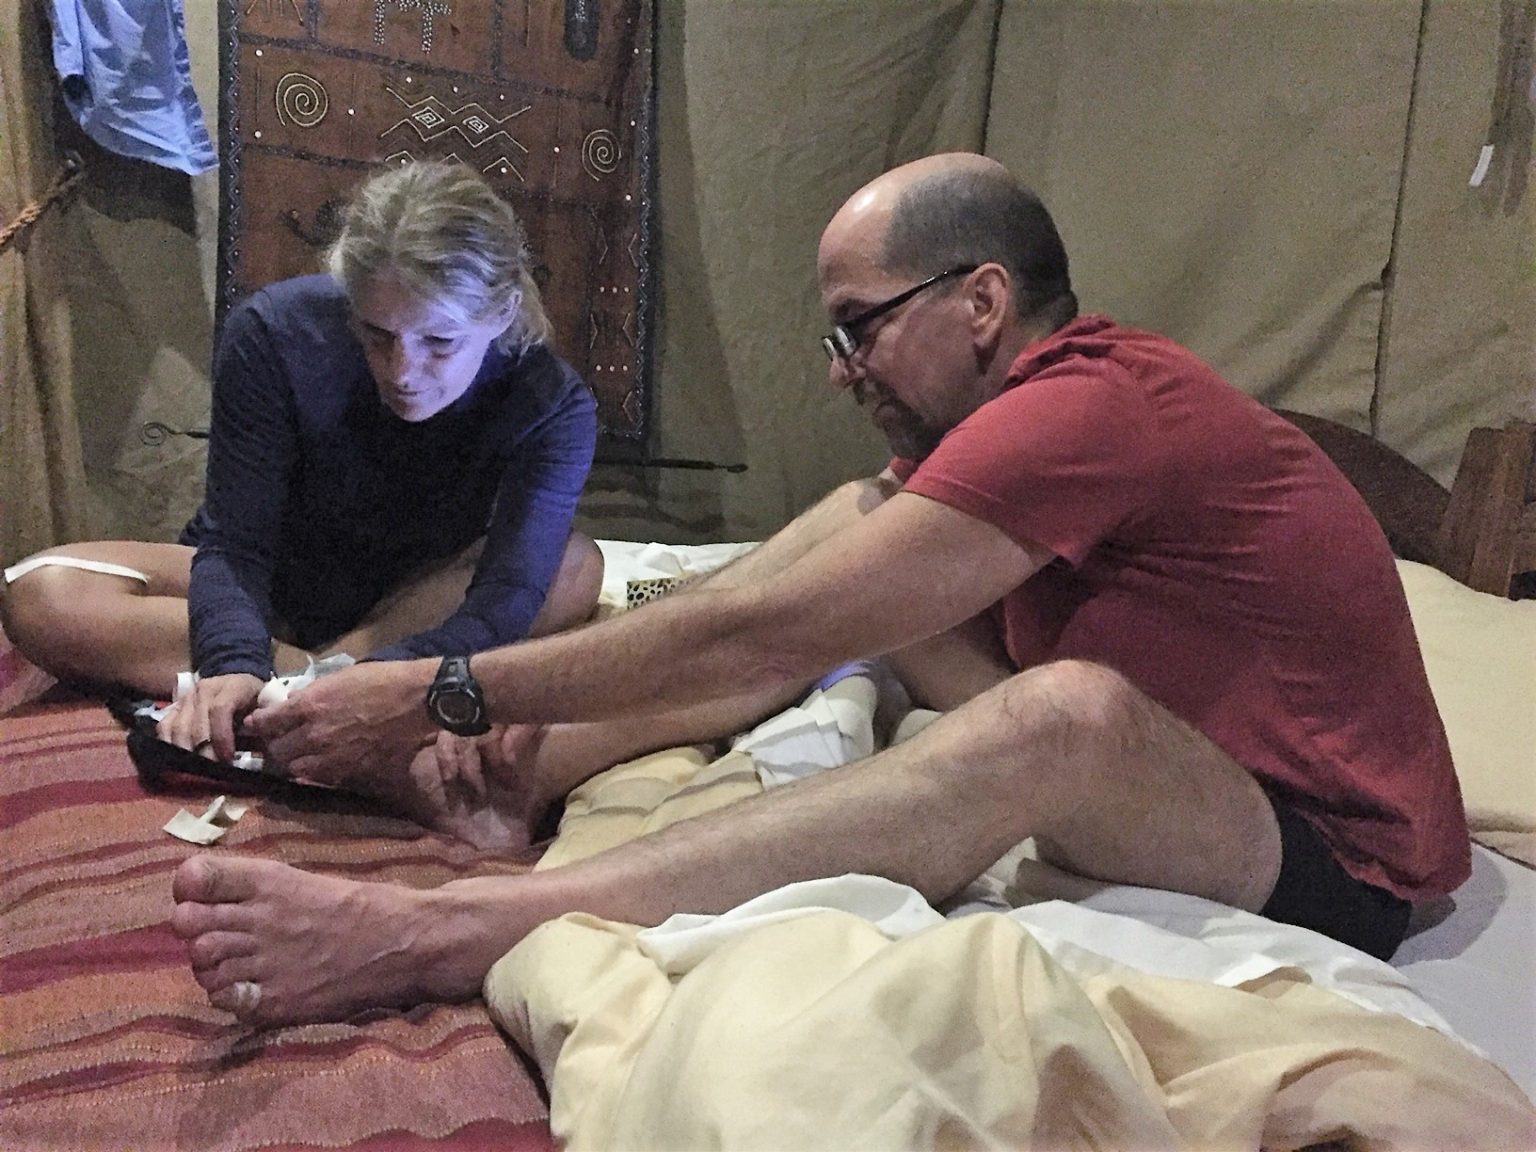 Aching feet and first aid for toenails after climbing Kilimanjaro